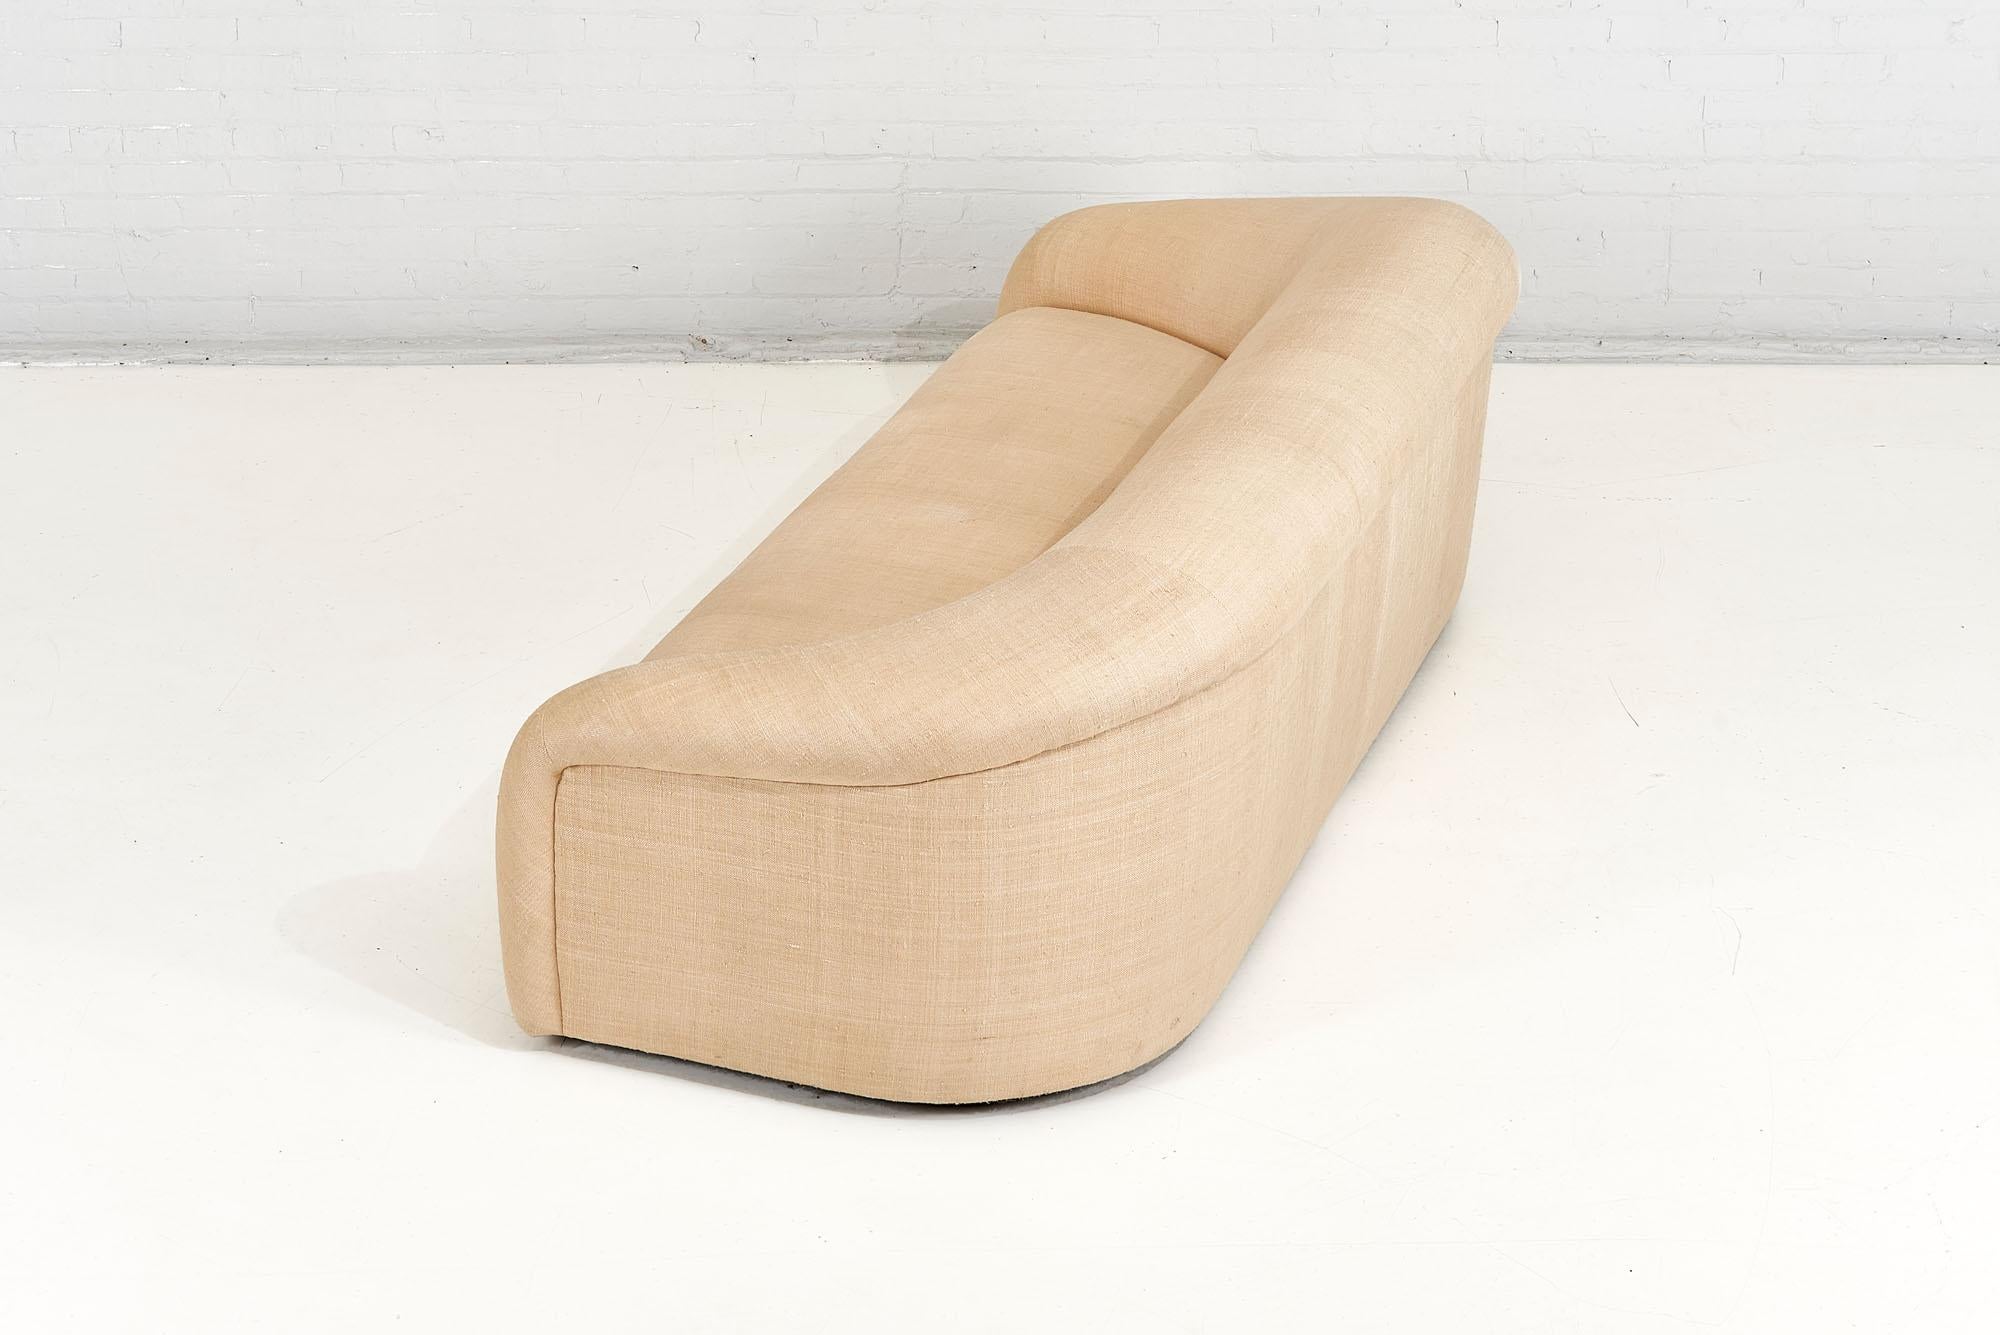 Upholstery Organic Form Sofa by Preview, ca 1991